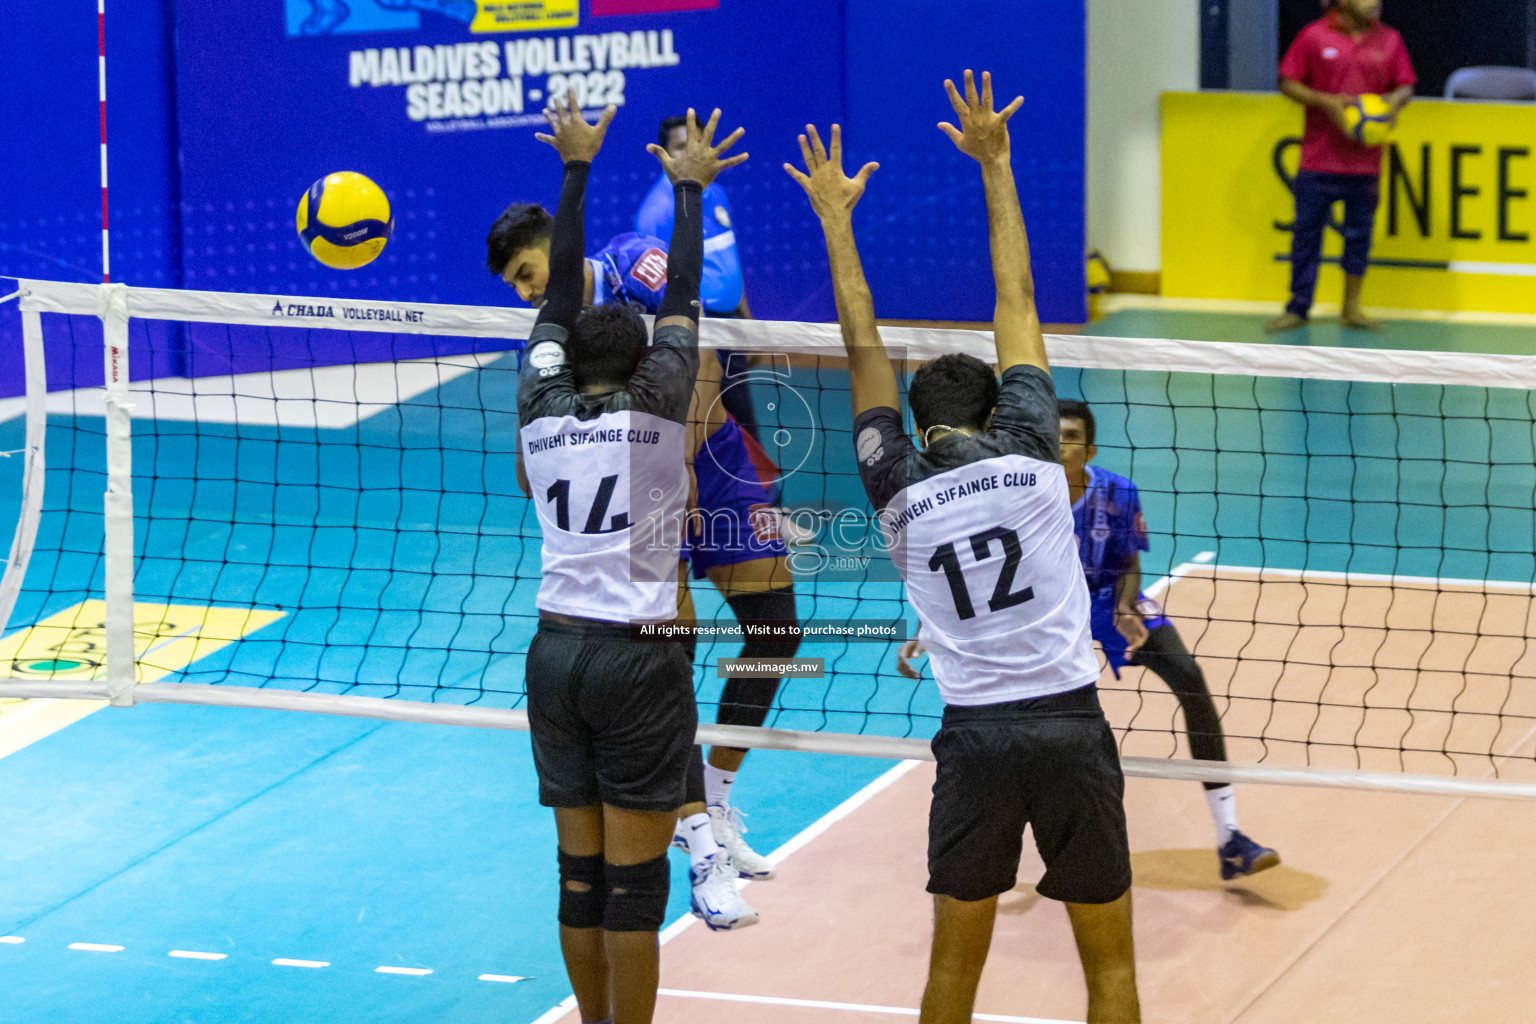 Dhivehi Sifainge Club vs Police Club in the Men's Division of Milo National Volleyball League 2022 held on 02 July 2022 in Social Center, Male', Maldives